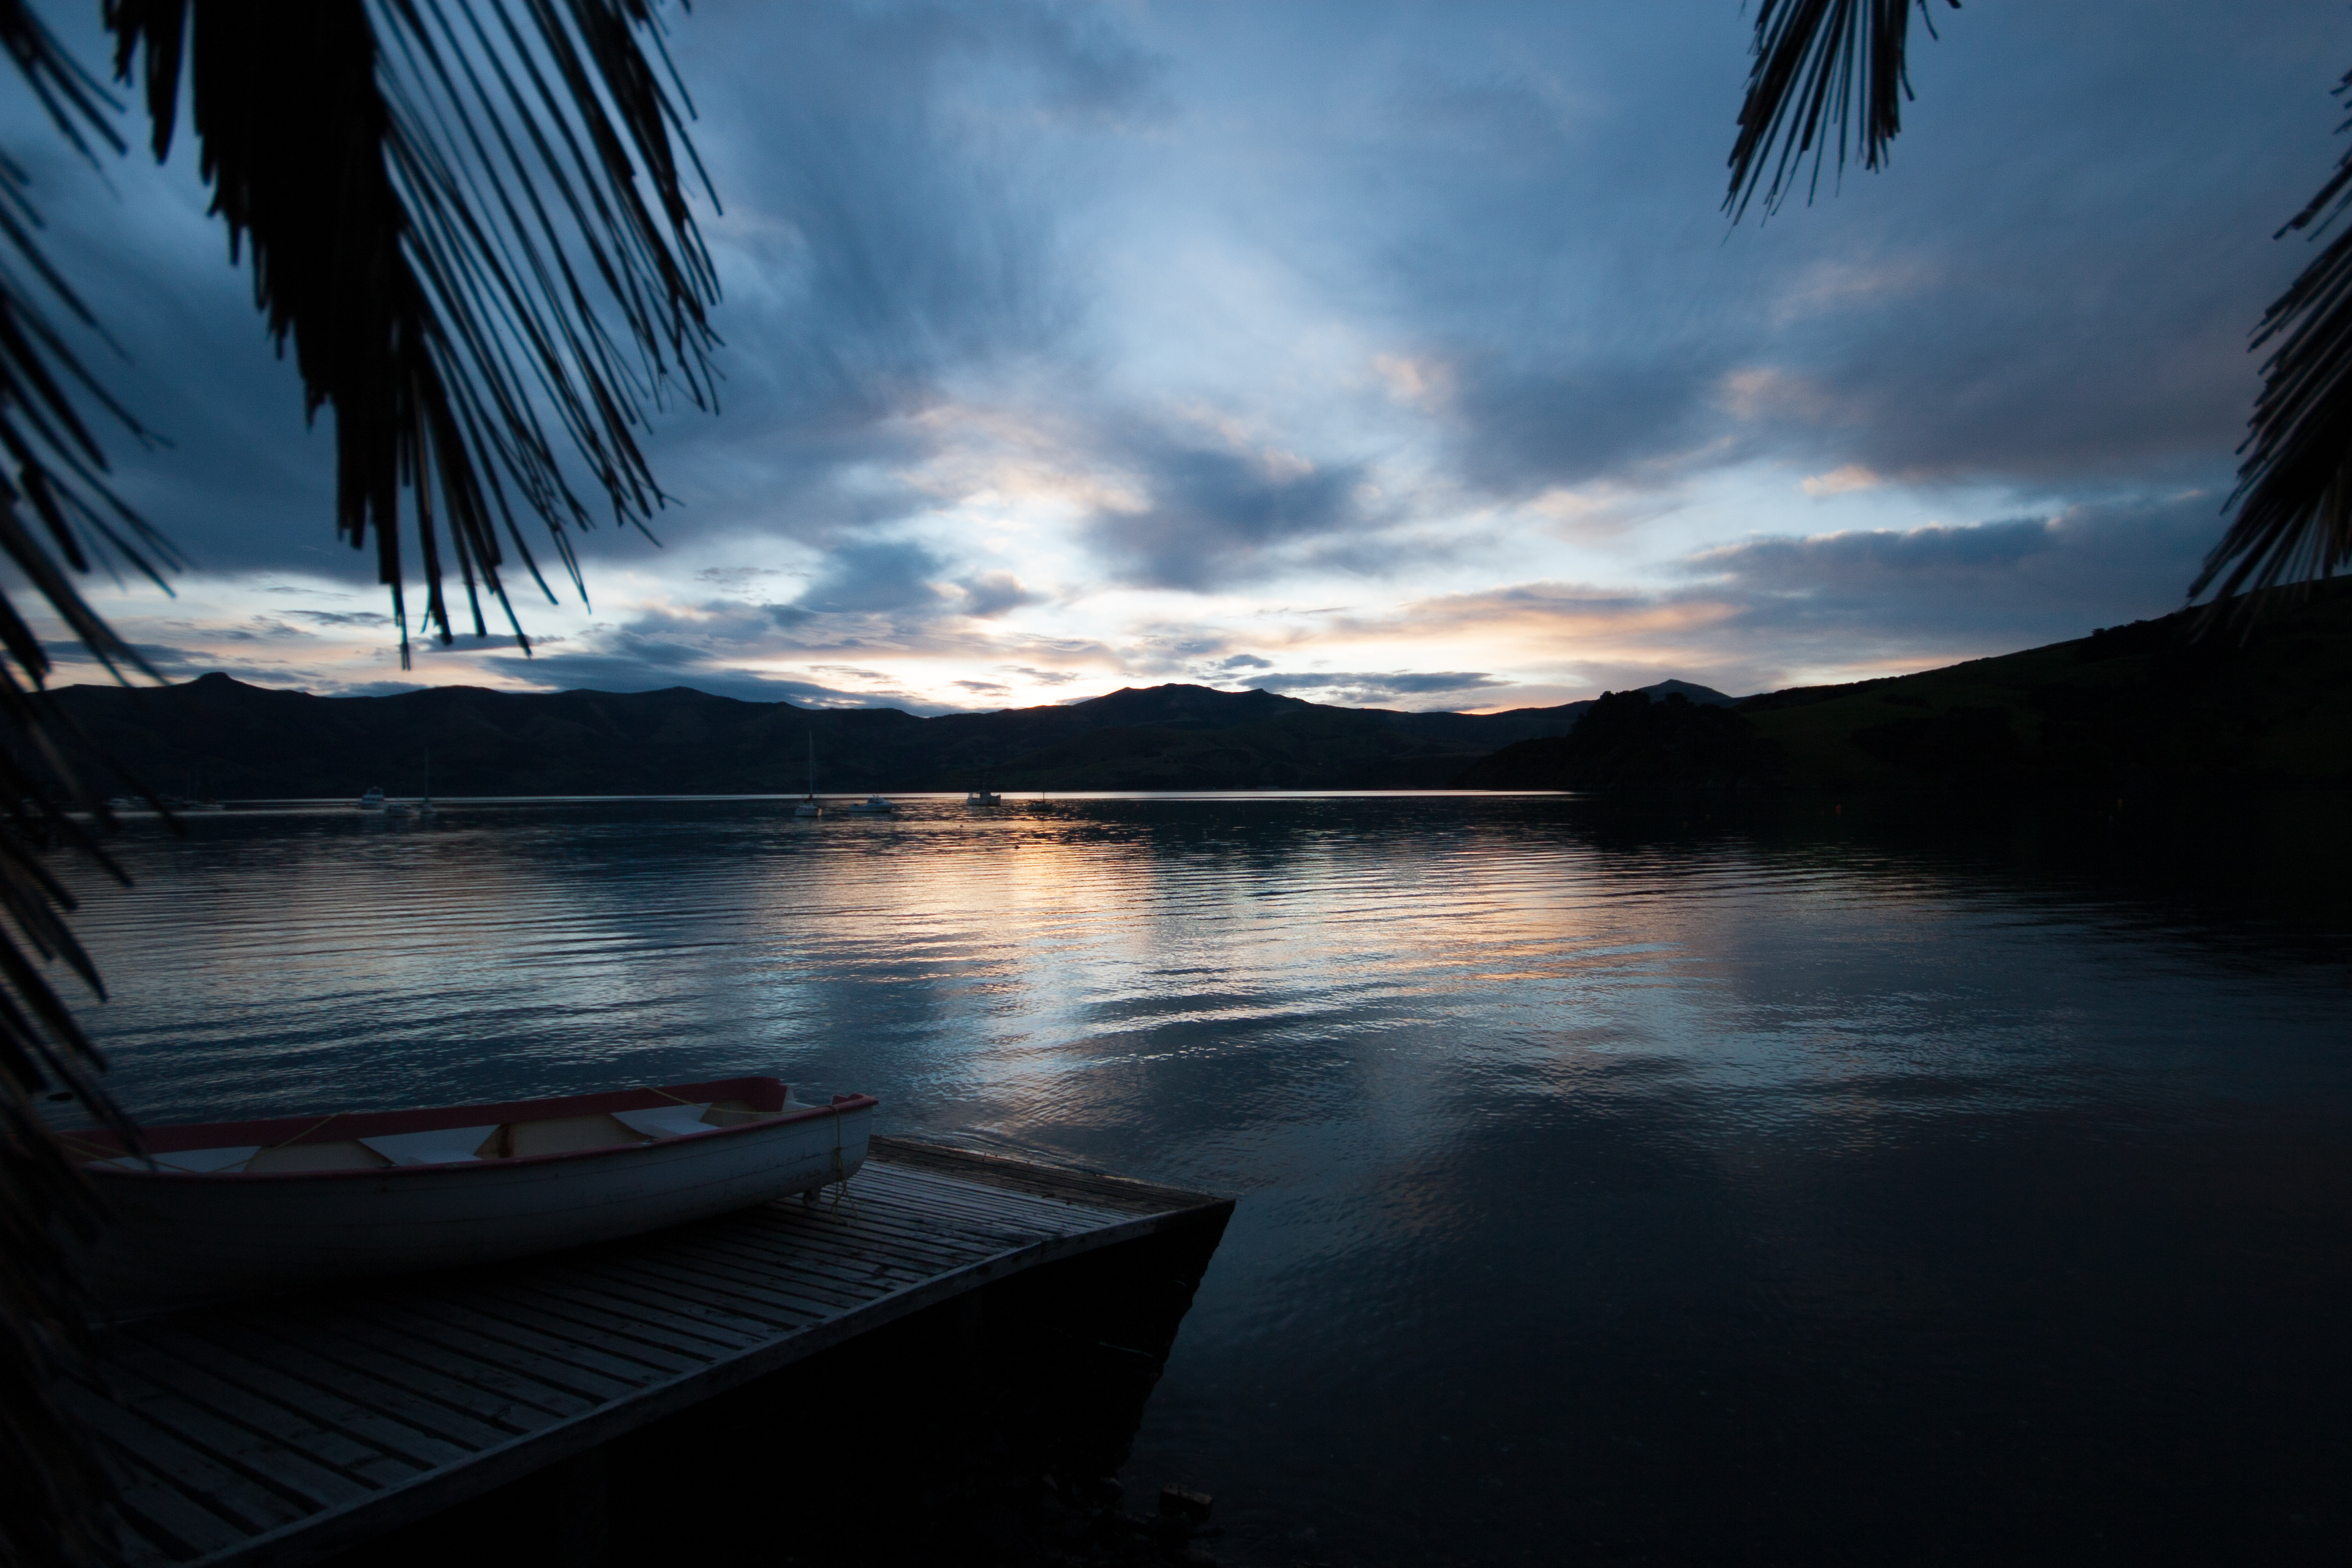 sunsetting over the mountains in front of a lake with palm trees just inside the frame a boat waiting on a ramp